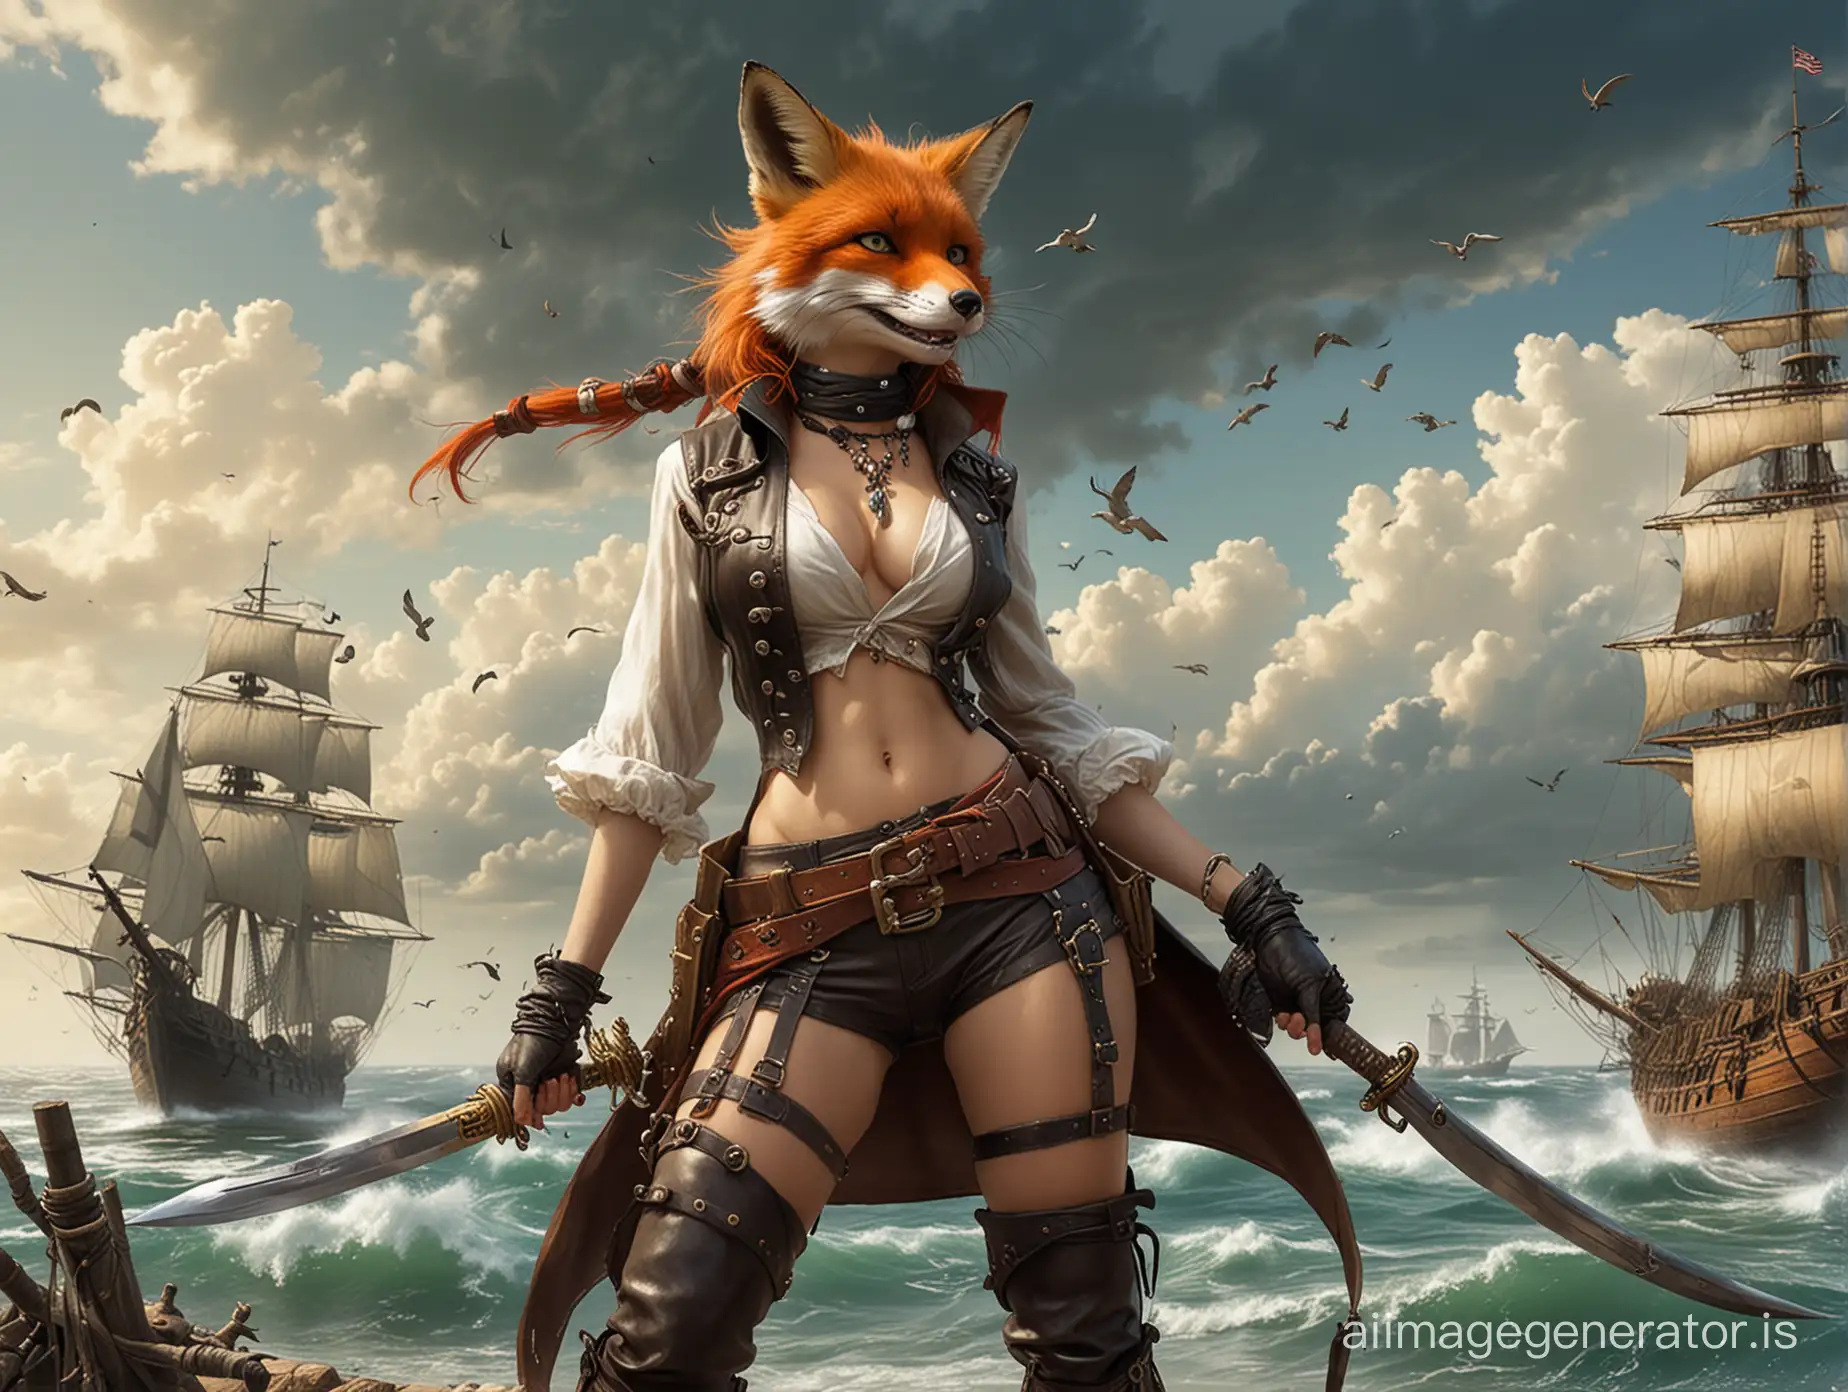 Bright-Fox-Pirate-Girl-in-Marine-Scenery-with-Epic-Pirate-Ship